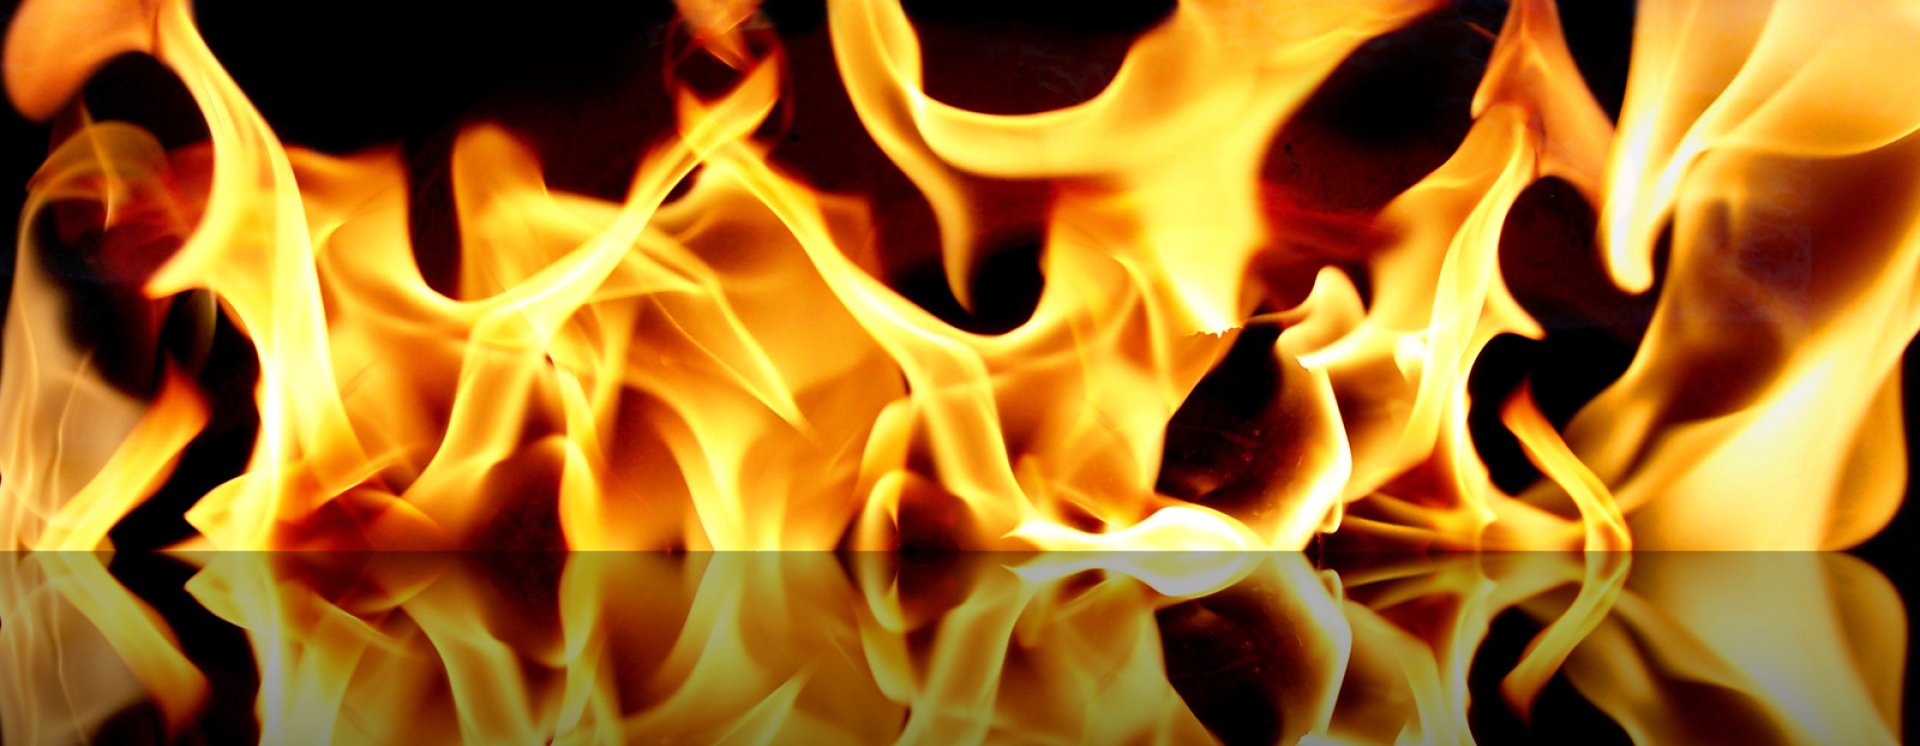 Abstract fire wallpapers copy